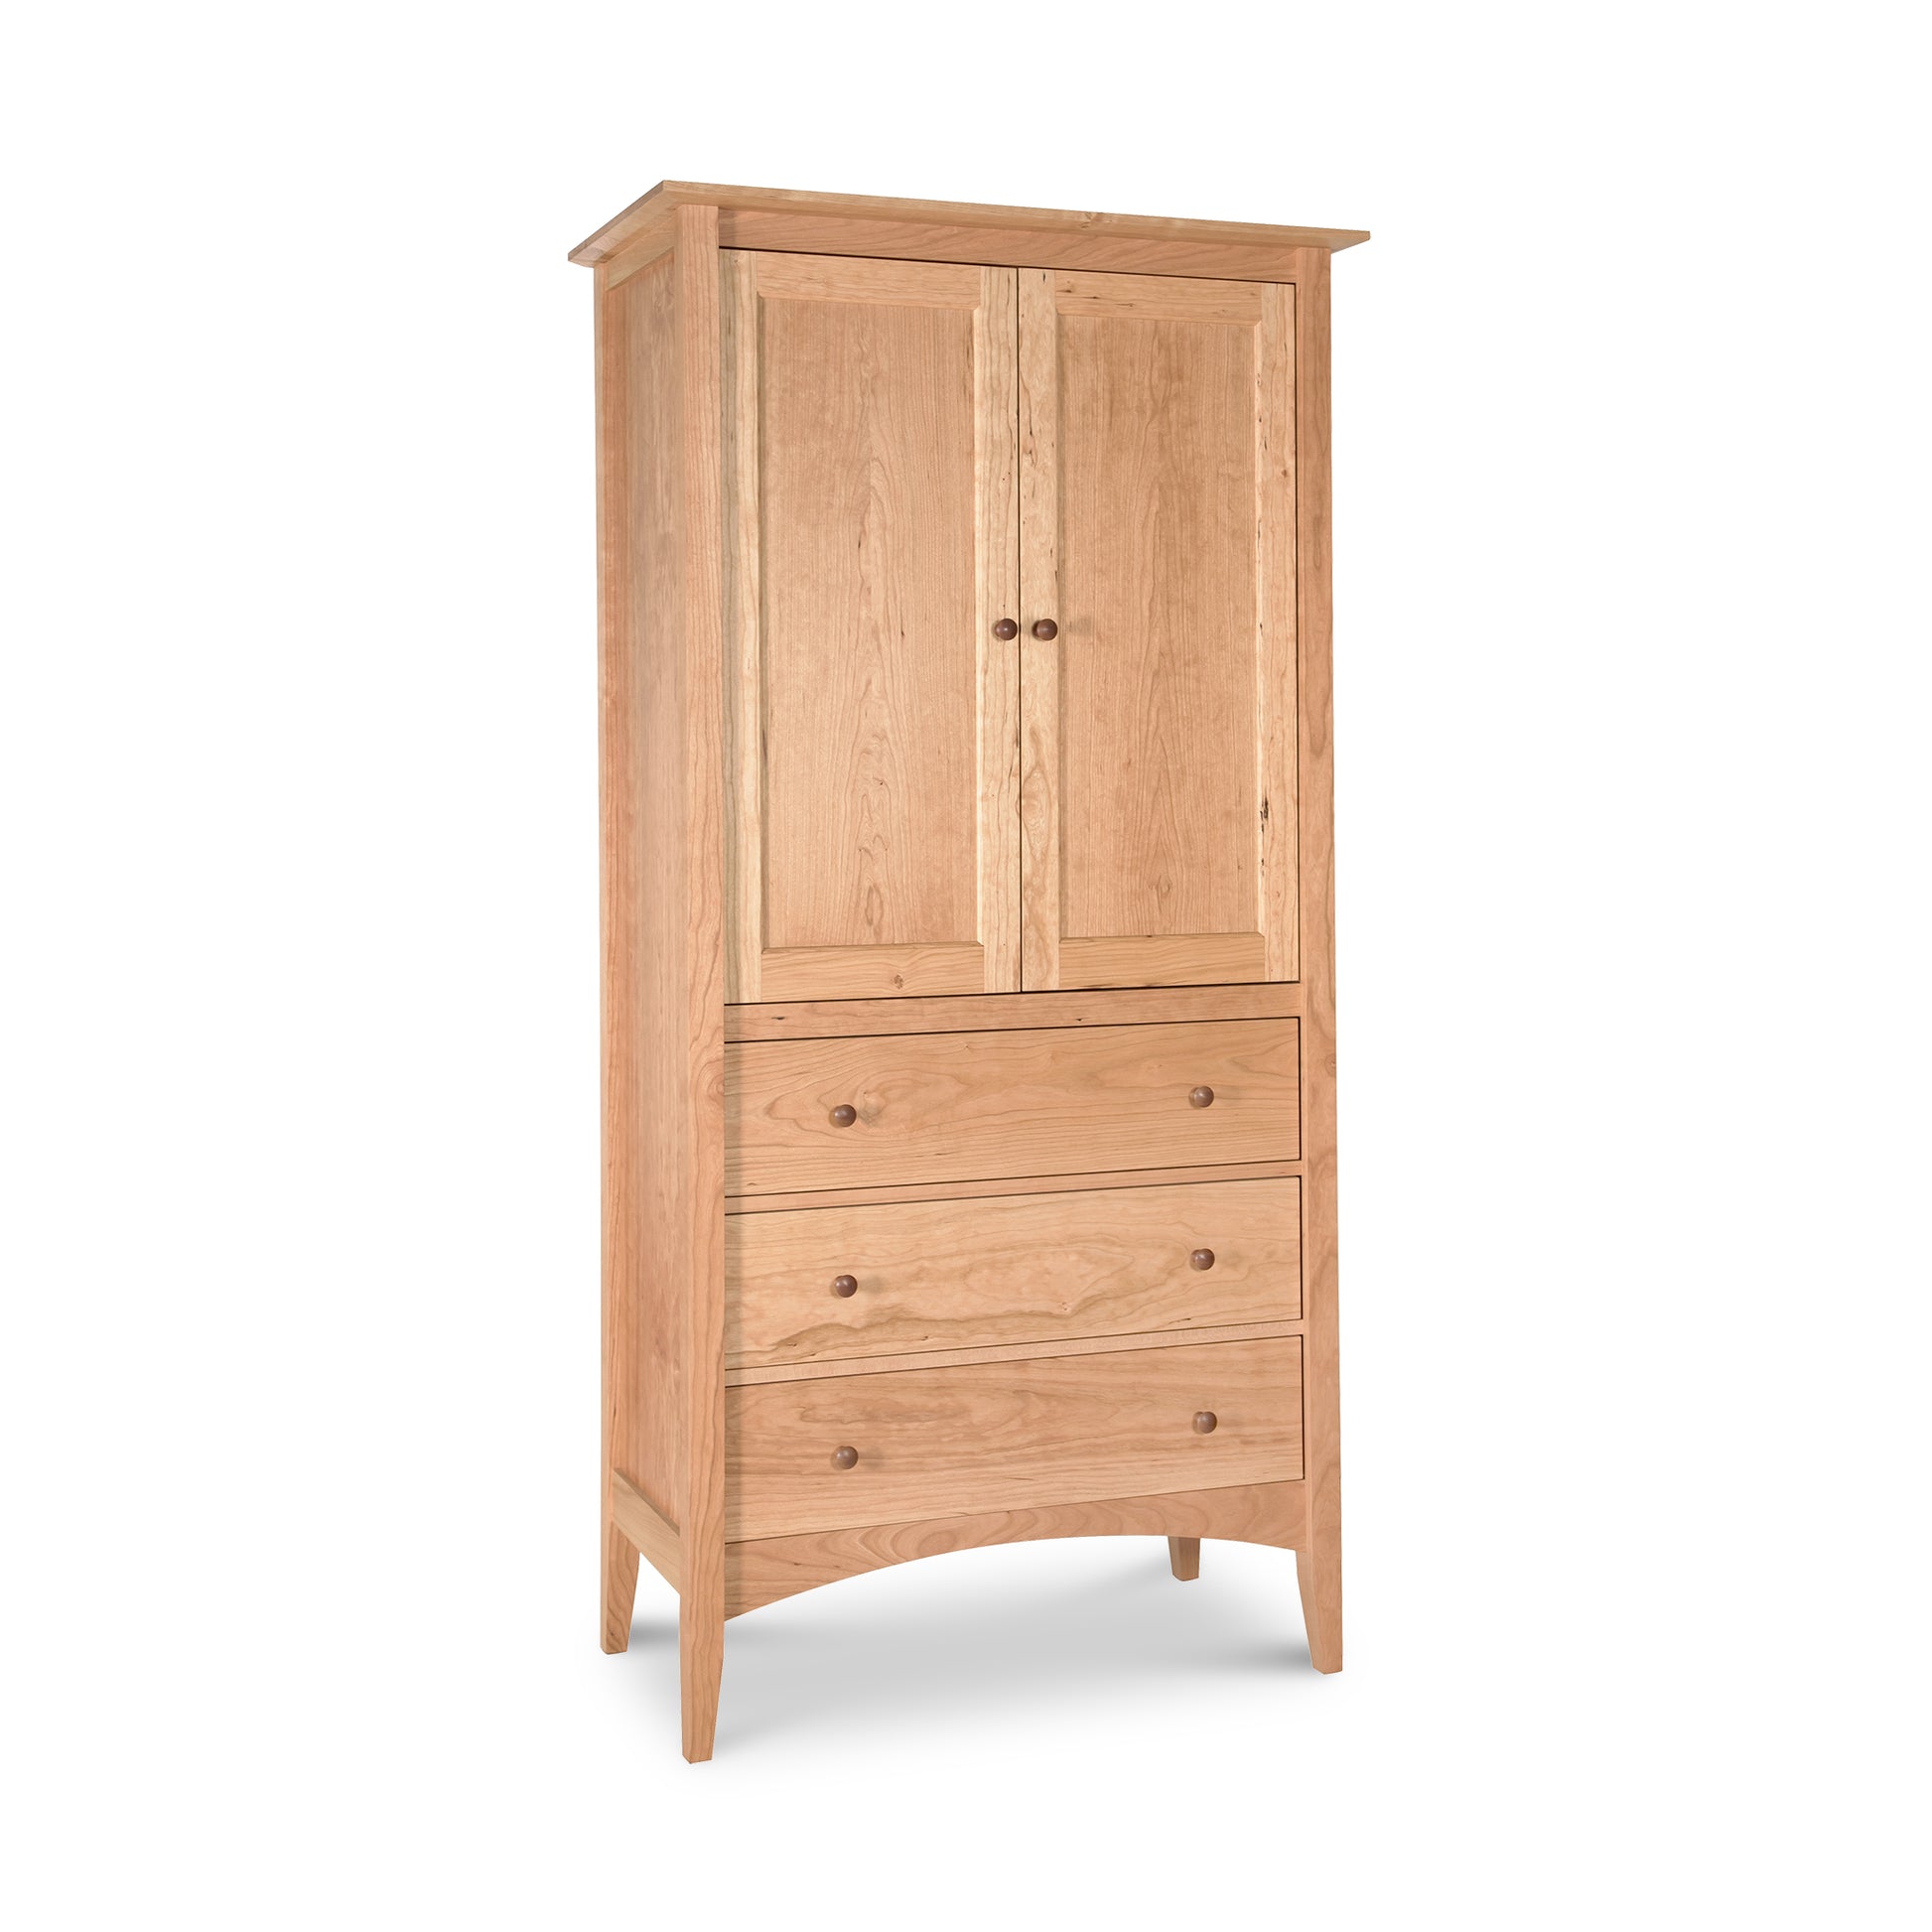 A solid wood Maple Corner Woodworks American Shaker Armoire featuring two drawers and two doors.